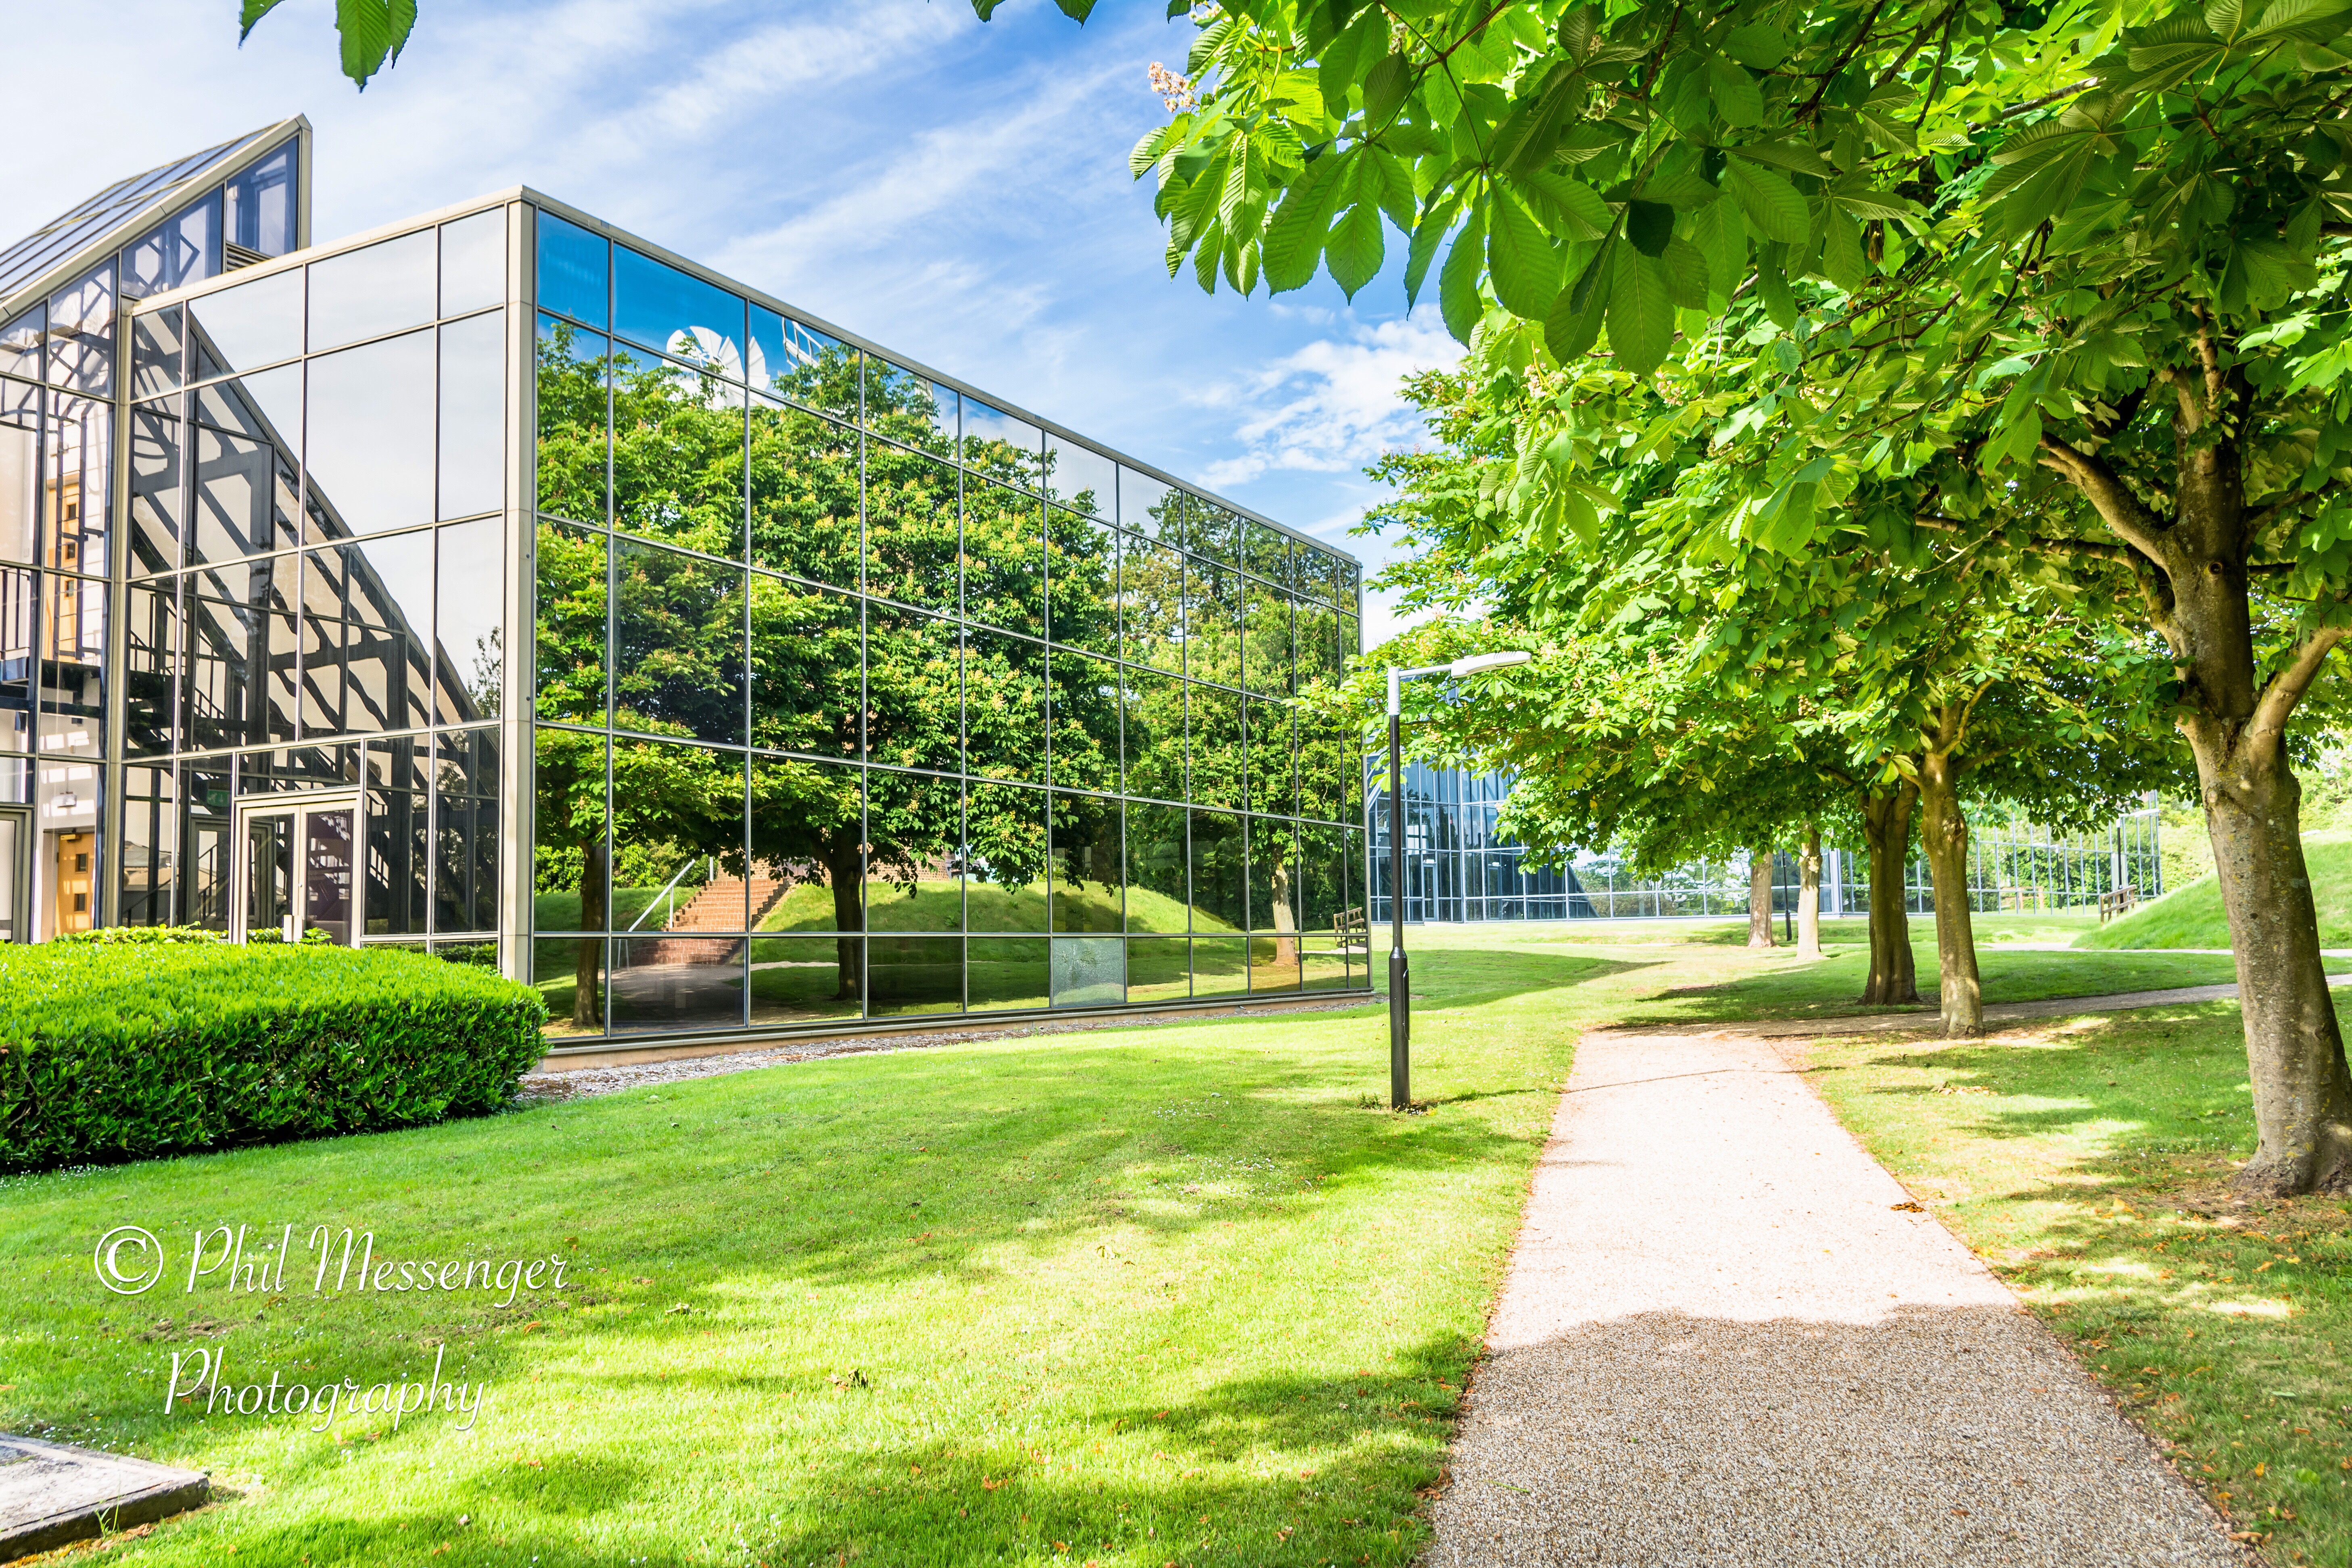 Horse chestnut trees reflecting on a glass building at Windmill Hill Business park, Swindon.